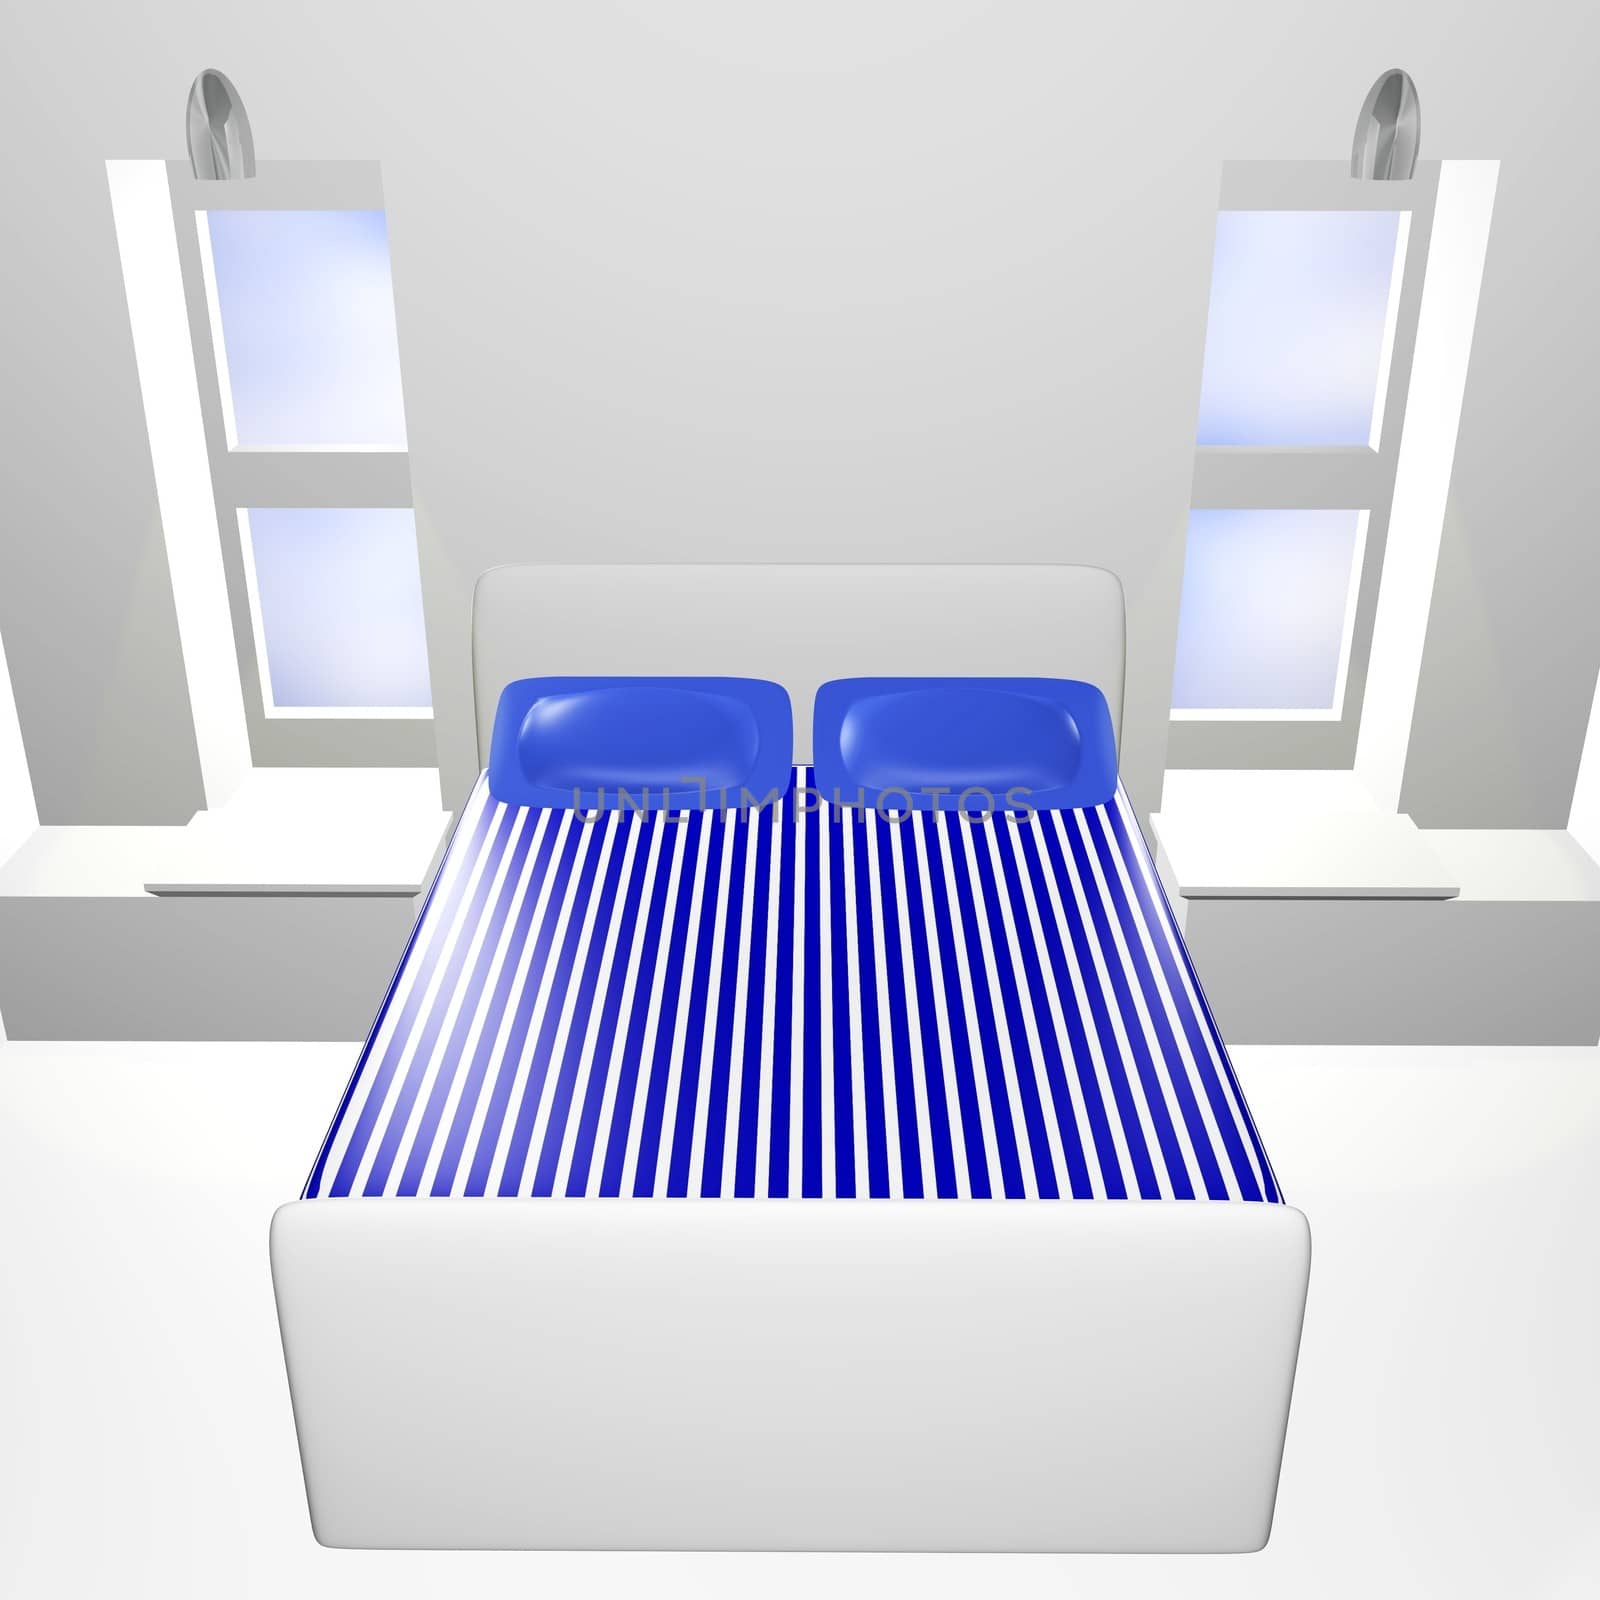 3D White Bedroom with Blue Bedspread by RichieThakur